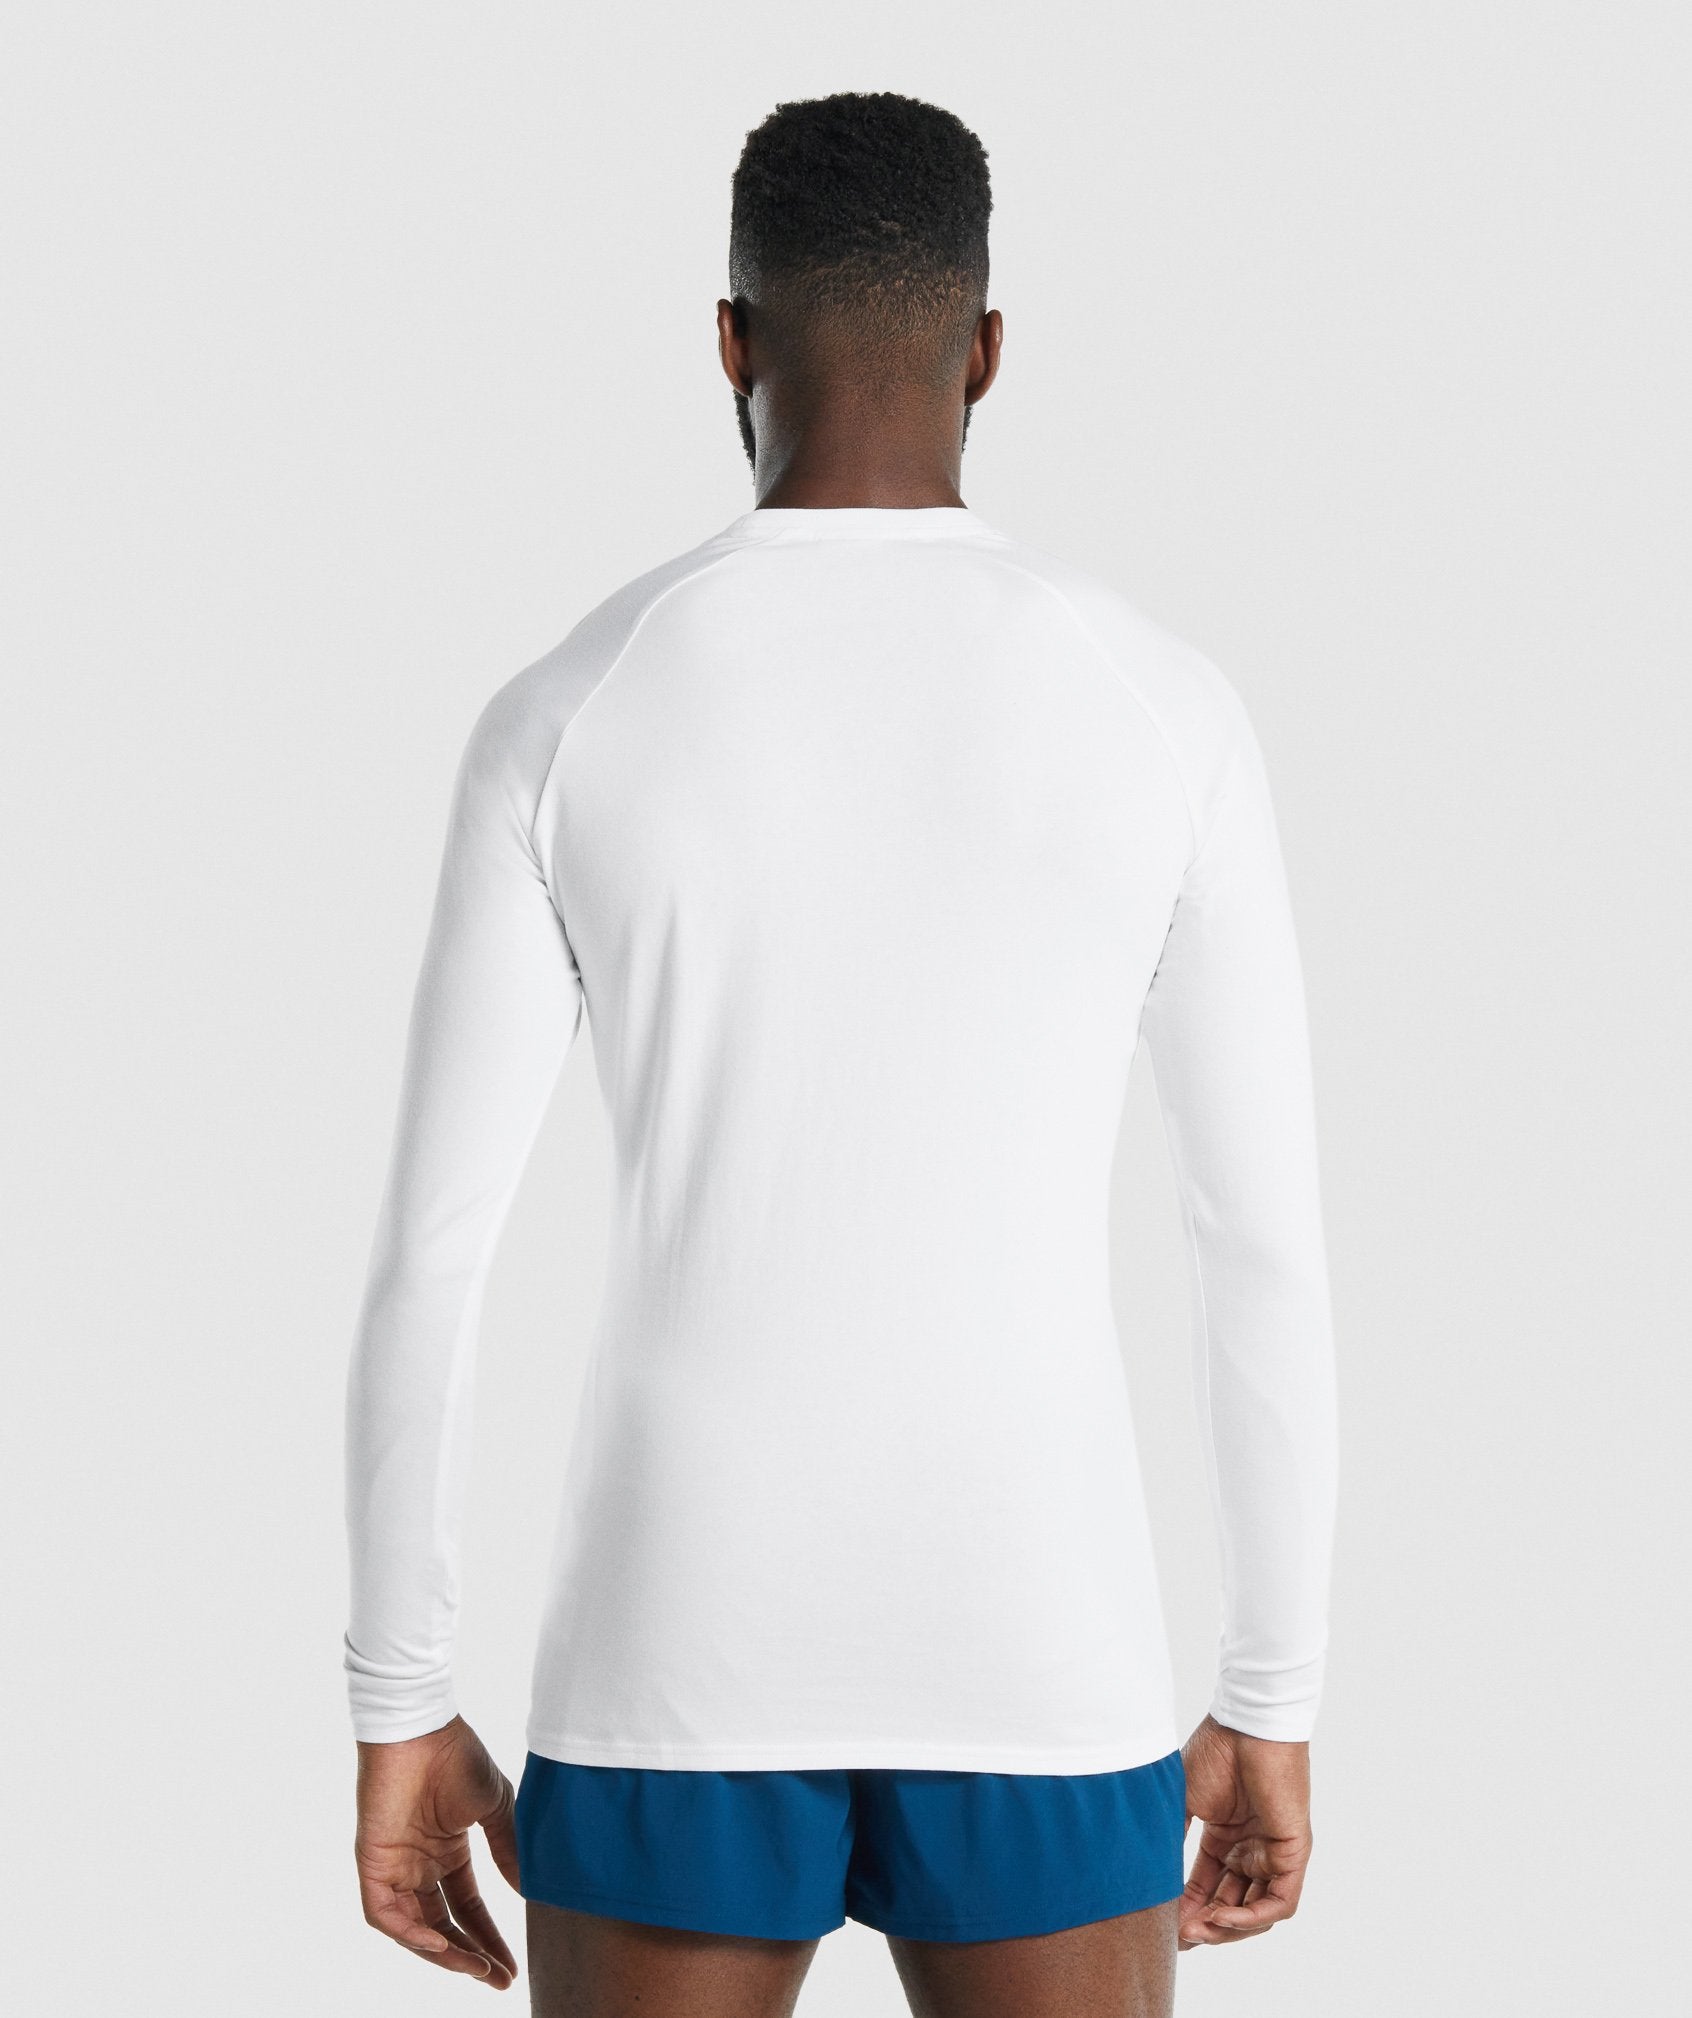 Apollo Long Sleeve T-Shirt in White - view 2